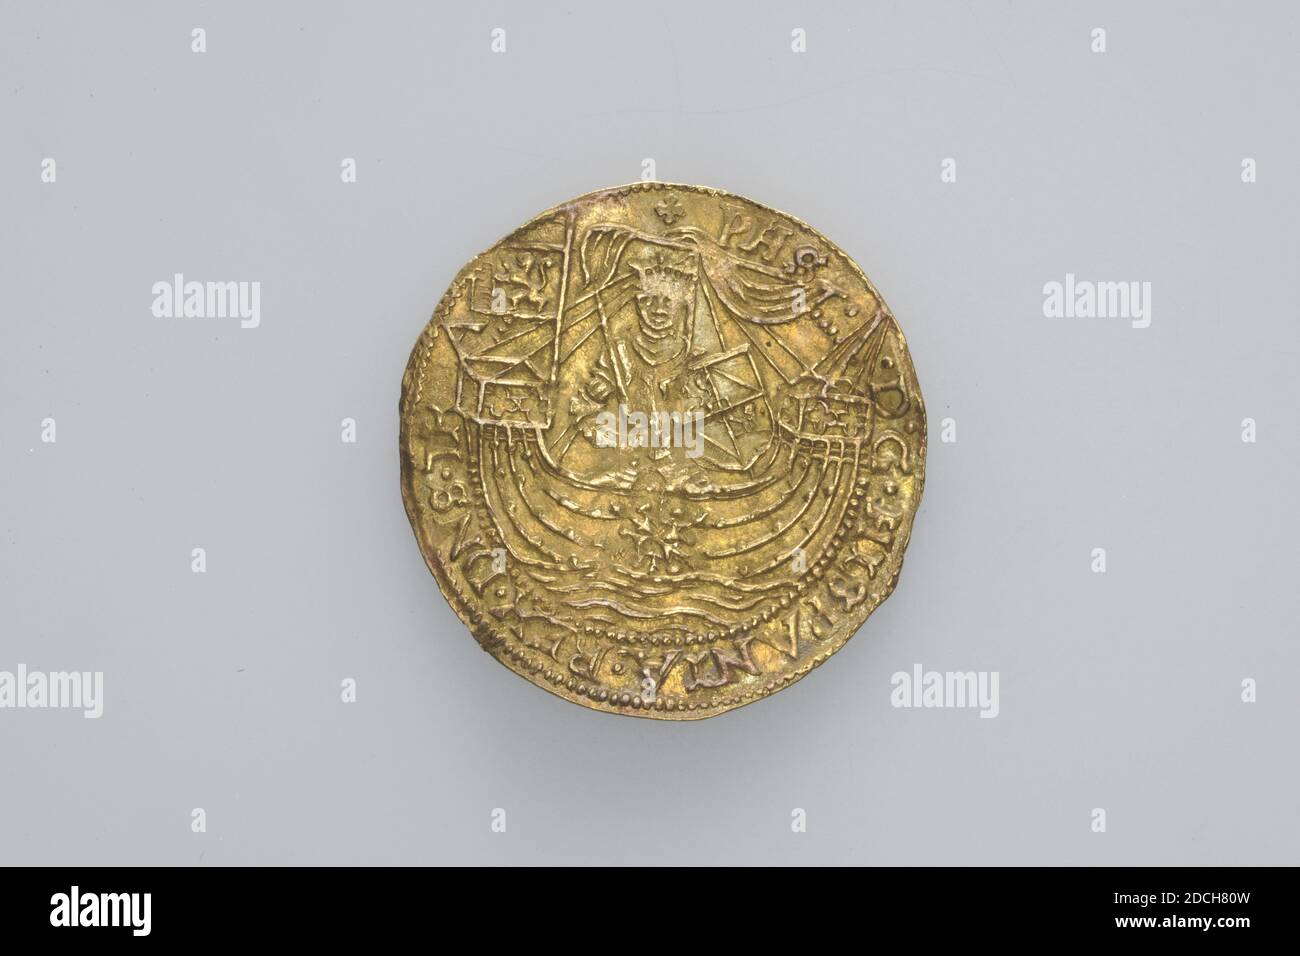 coin medium of exchange, Anonymous, 1579, minted, General: 3 x 0.1cm 30 x 1mm, Weight: 3.5g, ship, knight, lion, utrecht, Gold coin, half a rosenobel, minted in Utrecht in 1579. On the obverse a stylized ship is depicted at sea, with a pennant at the top. In the ship a standing knight with a shield on his left arm and a sword in his right hand. On the far left a coat of arms with a climbing lion. Around the performance the caption: PHS. D.G. HISPANIA.REX.DNS.TR. On the reverse an eight-leaf rosette containing a sixteen-pointed star. In the leaves of the rosette alternately a crowned, climbing Stock Photo